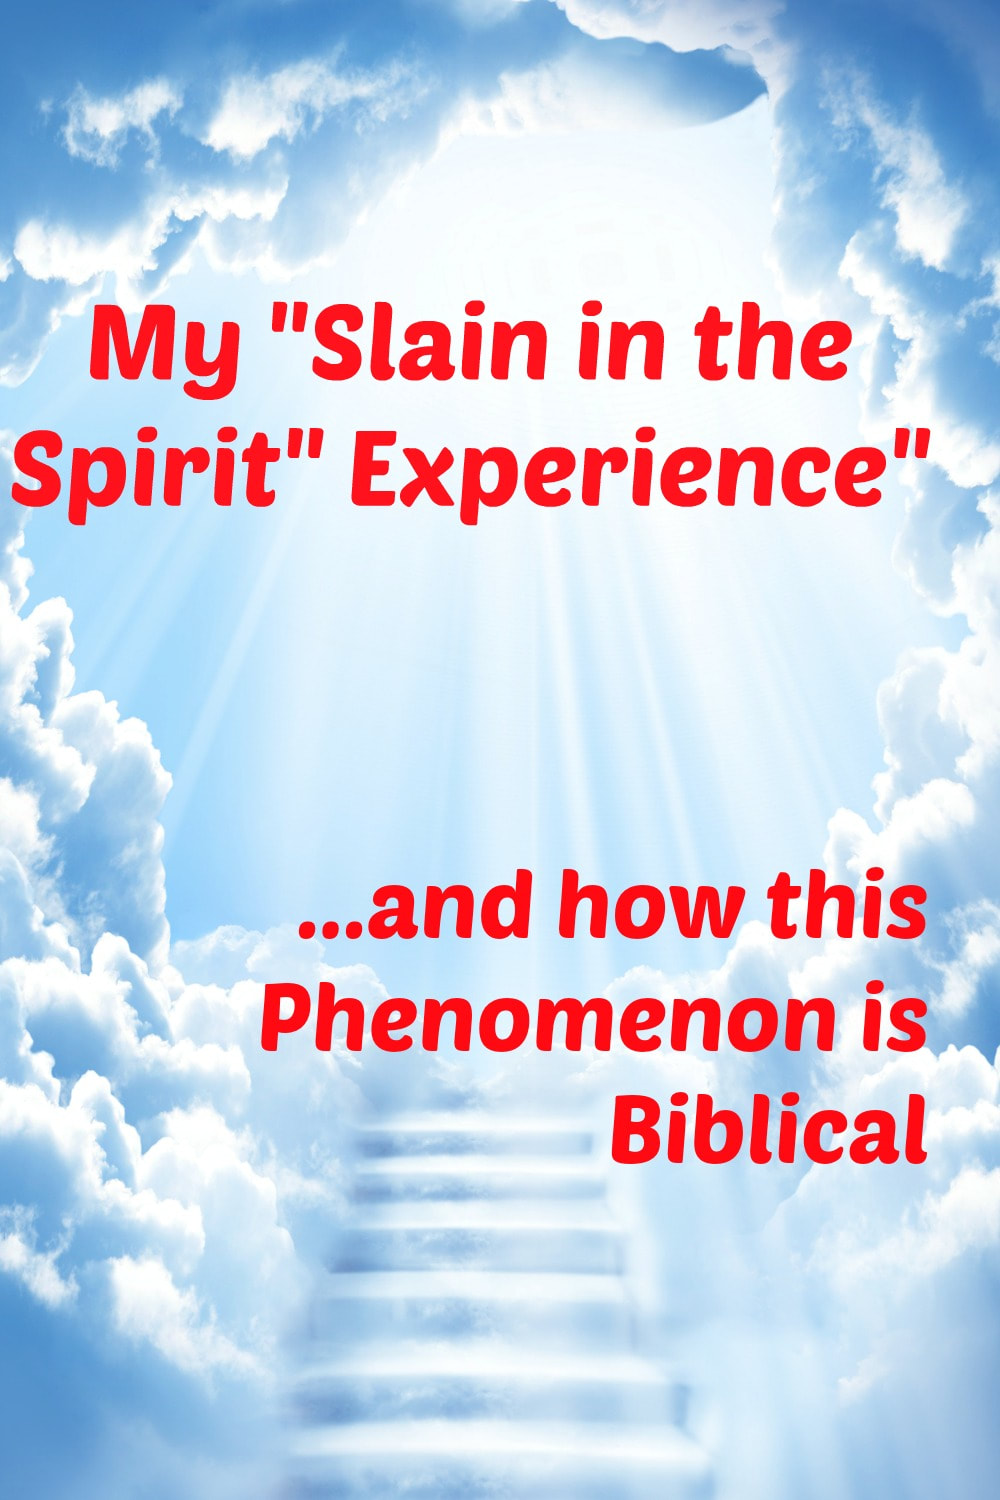 Pinterest Pinnable Image. Repin this to share with your friends and family the Biblical explanation for the slain in the Spirit experience! 